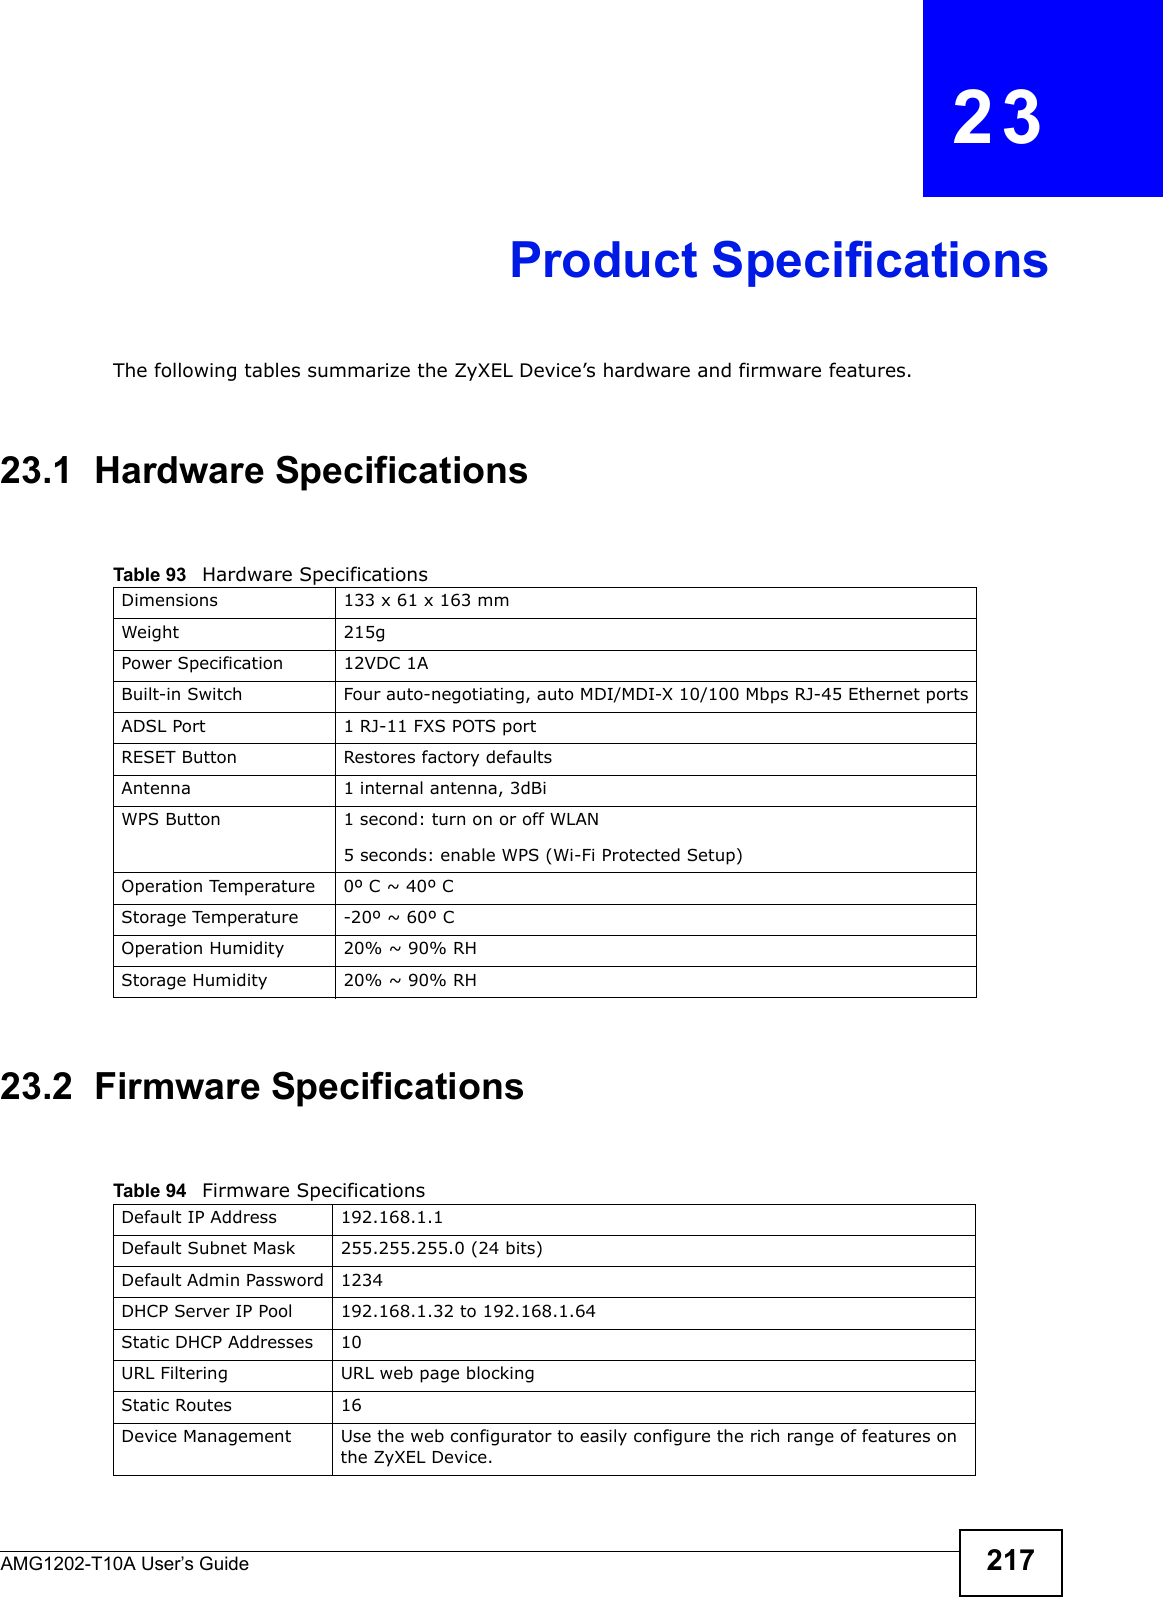 AMG1202-T10A User’s Guide 217CHAPTER   23Product SpecificationsThe following tables summarize the ZyXEL Device’s hardware and firmware features.23.1  Hardware Specifications23.2  Firmware SpecificationsTable 93   Hardware SpecificationsDimensions 133 x 61 x 163 mmWeight 215gPower Specification 12VDC 1ABuilt-in Switch Four auto-negotiating, auto MDI/MDI-X 10/100 Mbps RJ-45 Ethernet portsADSL Port 1 RJ-11 FXS POTS portRESET Button Restores factory defaultsAntenna 1 internal antenna, 3dBiWPS Button 1 second: turn on or off WLAN5 seconds: enable WPS (Wi-Fi Protected Setup)Operation Temperature 0º C ~ 40º CStorage Temperature -20º ~ 60º COperation Humidity 20% ~ 90% RHStorage Humidity 20% ~ 90% RHTable 94   Firmware Specifications Default IP Address 192.168.1.1Default Subnet Mask 255.255.255.0 (24 bits)Default Admin Password 1234DHCP Server IP Pool 192.168.1.32 to 192.168.1.64 Static DHCP Addresses 10URL Filtering URL web page blockingStatic Routes 16Device Management Use the web configurator to easily configure the rich range of features on the ZyXEL Device.